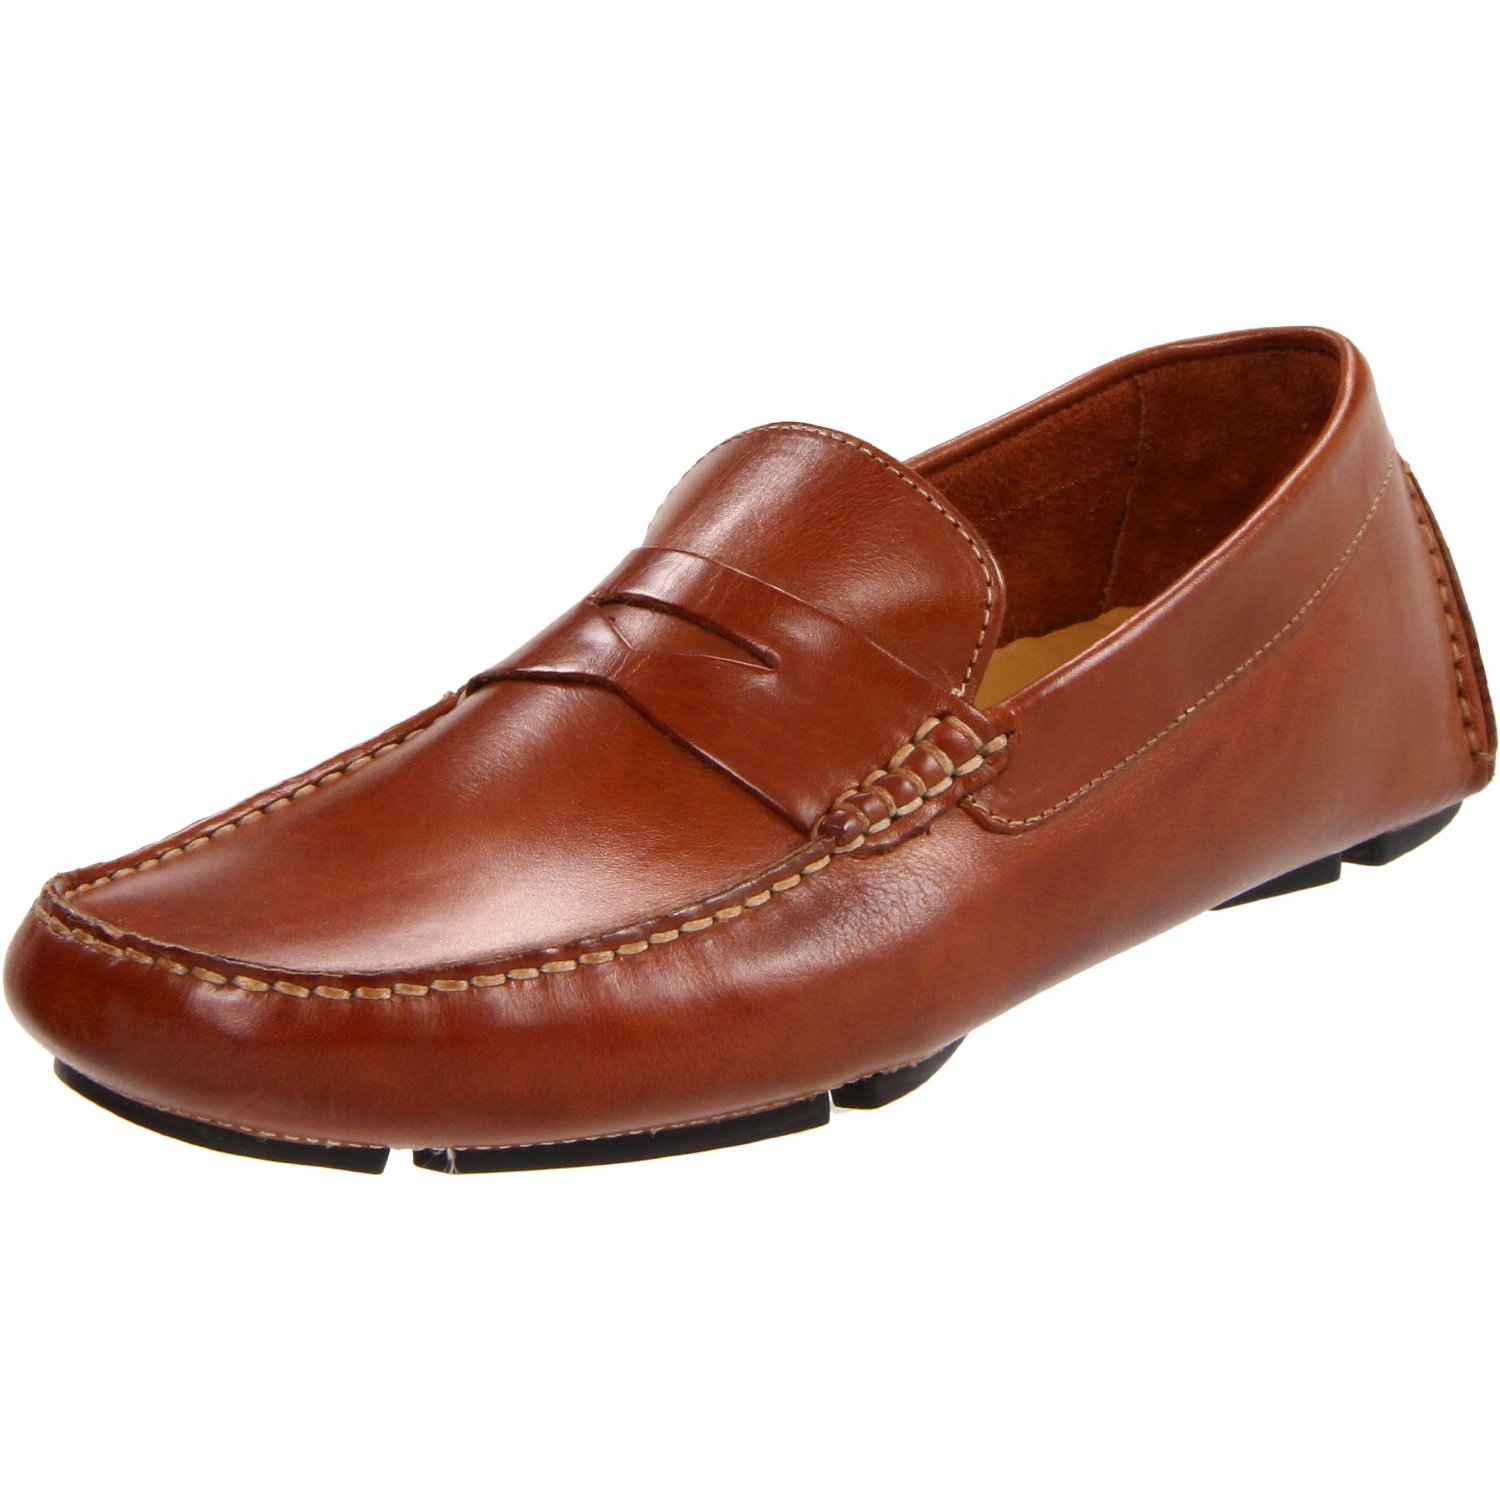 Cole haan 'howland' Penny Loafer in Brown for Men (saddle tan leather ...